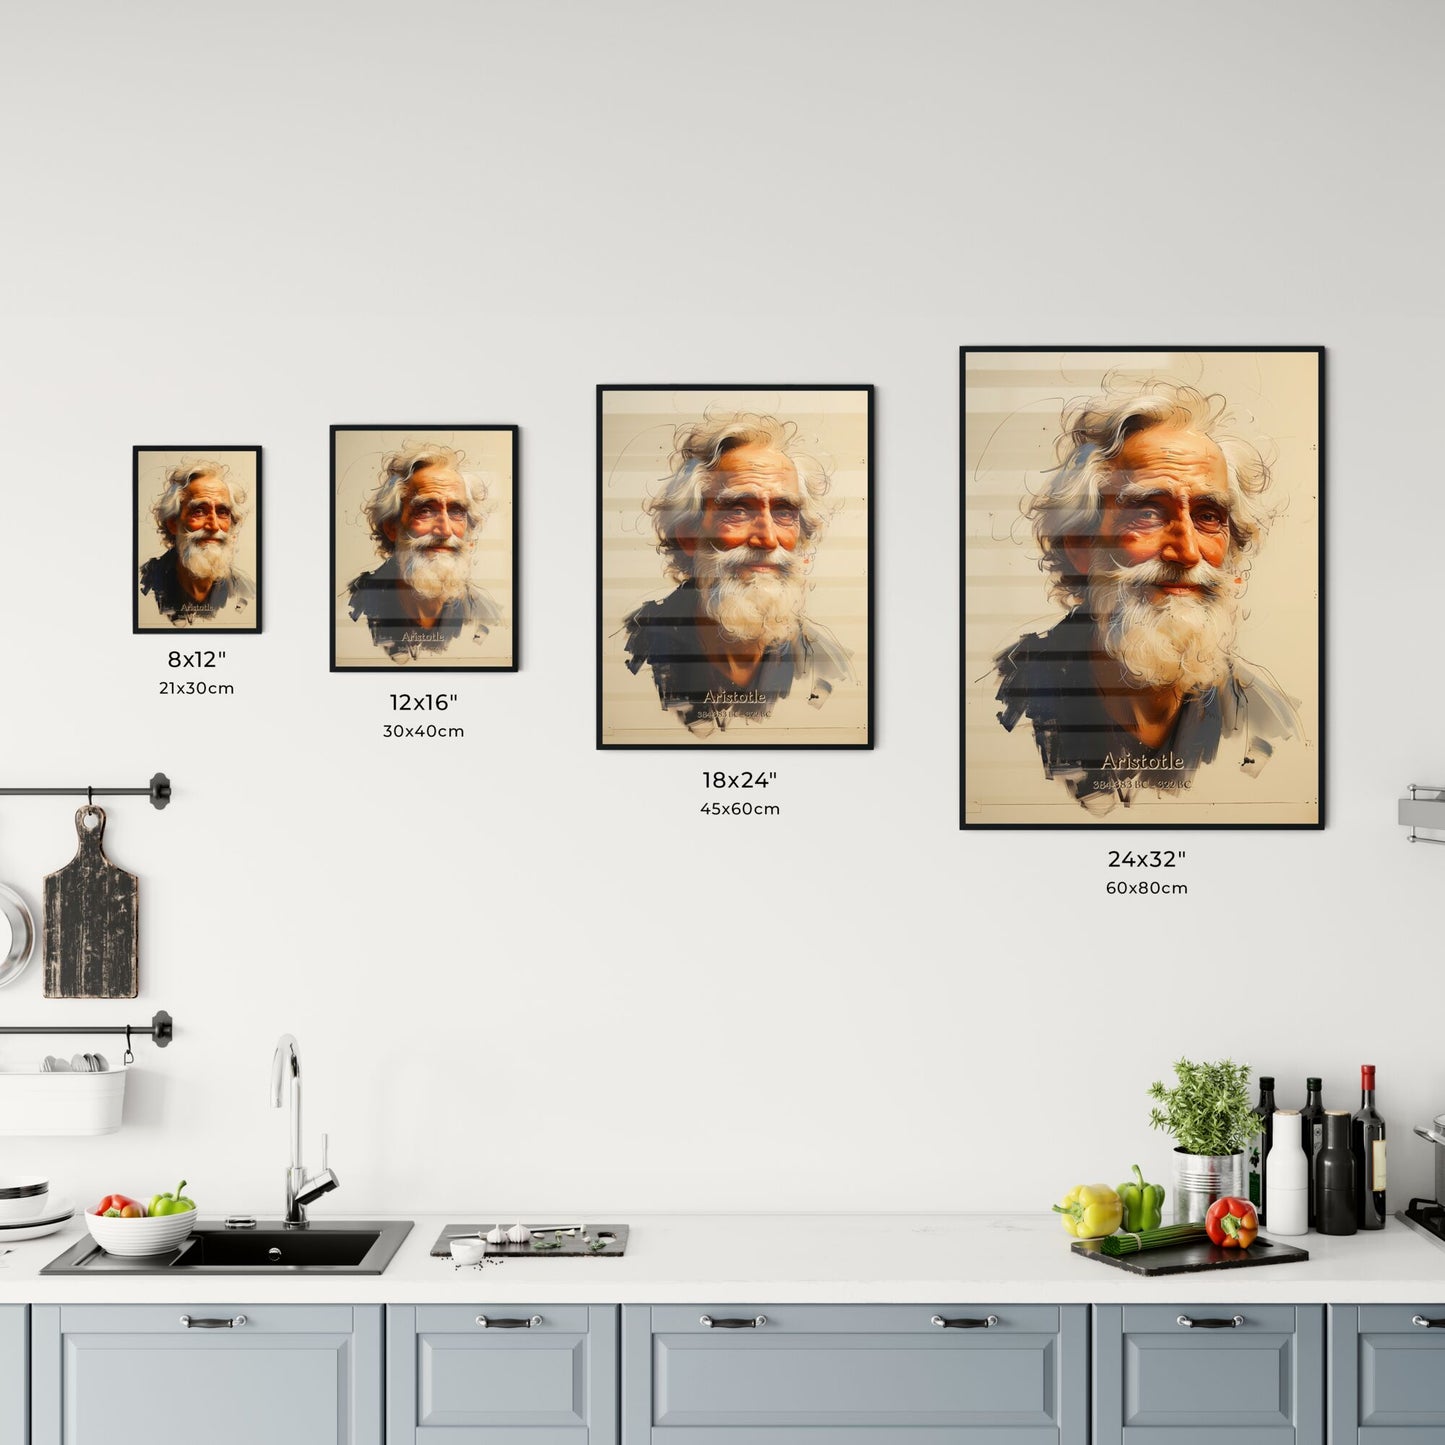 Aristotle, 384-383 BC - 322 BC, A Poster of a painting of a man with a beard Default Title